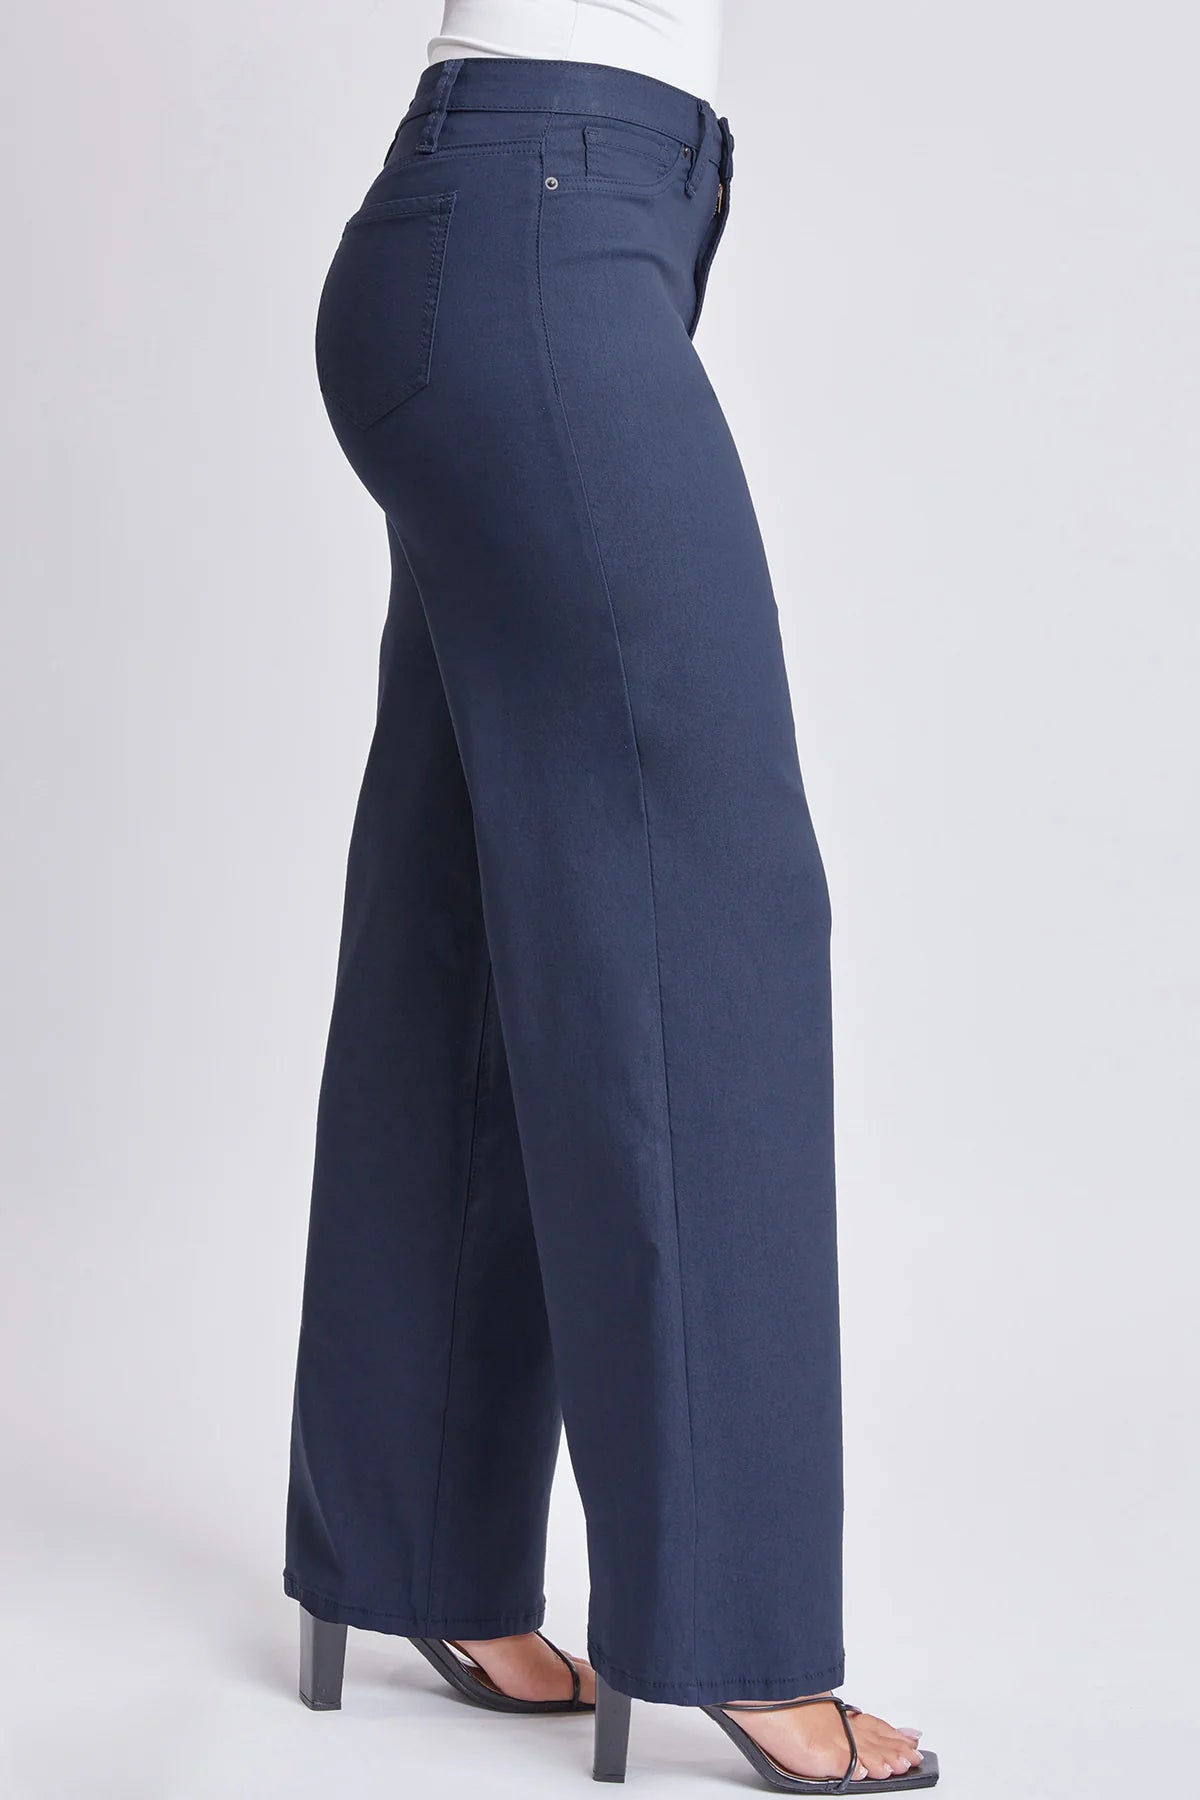 HYPERSTRETCH COLORED WIDE LEG - NAVY